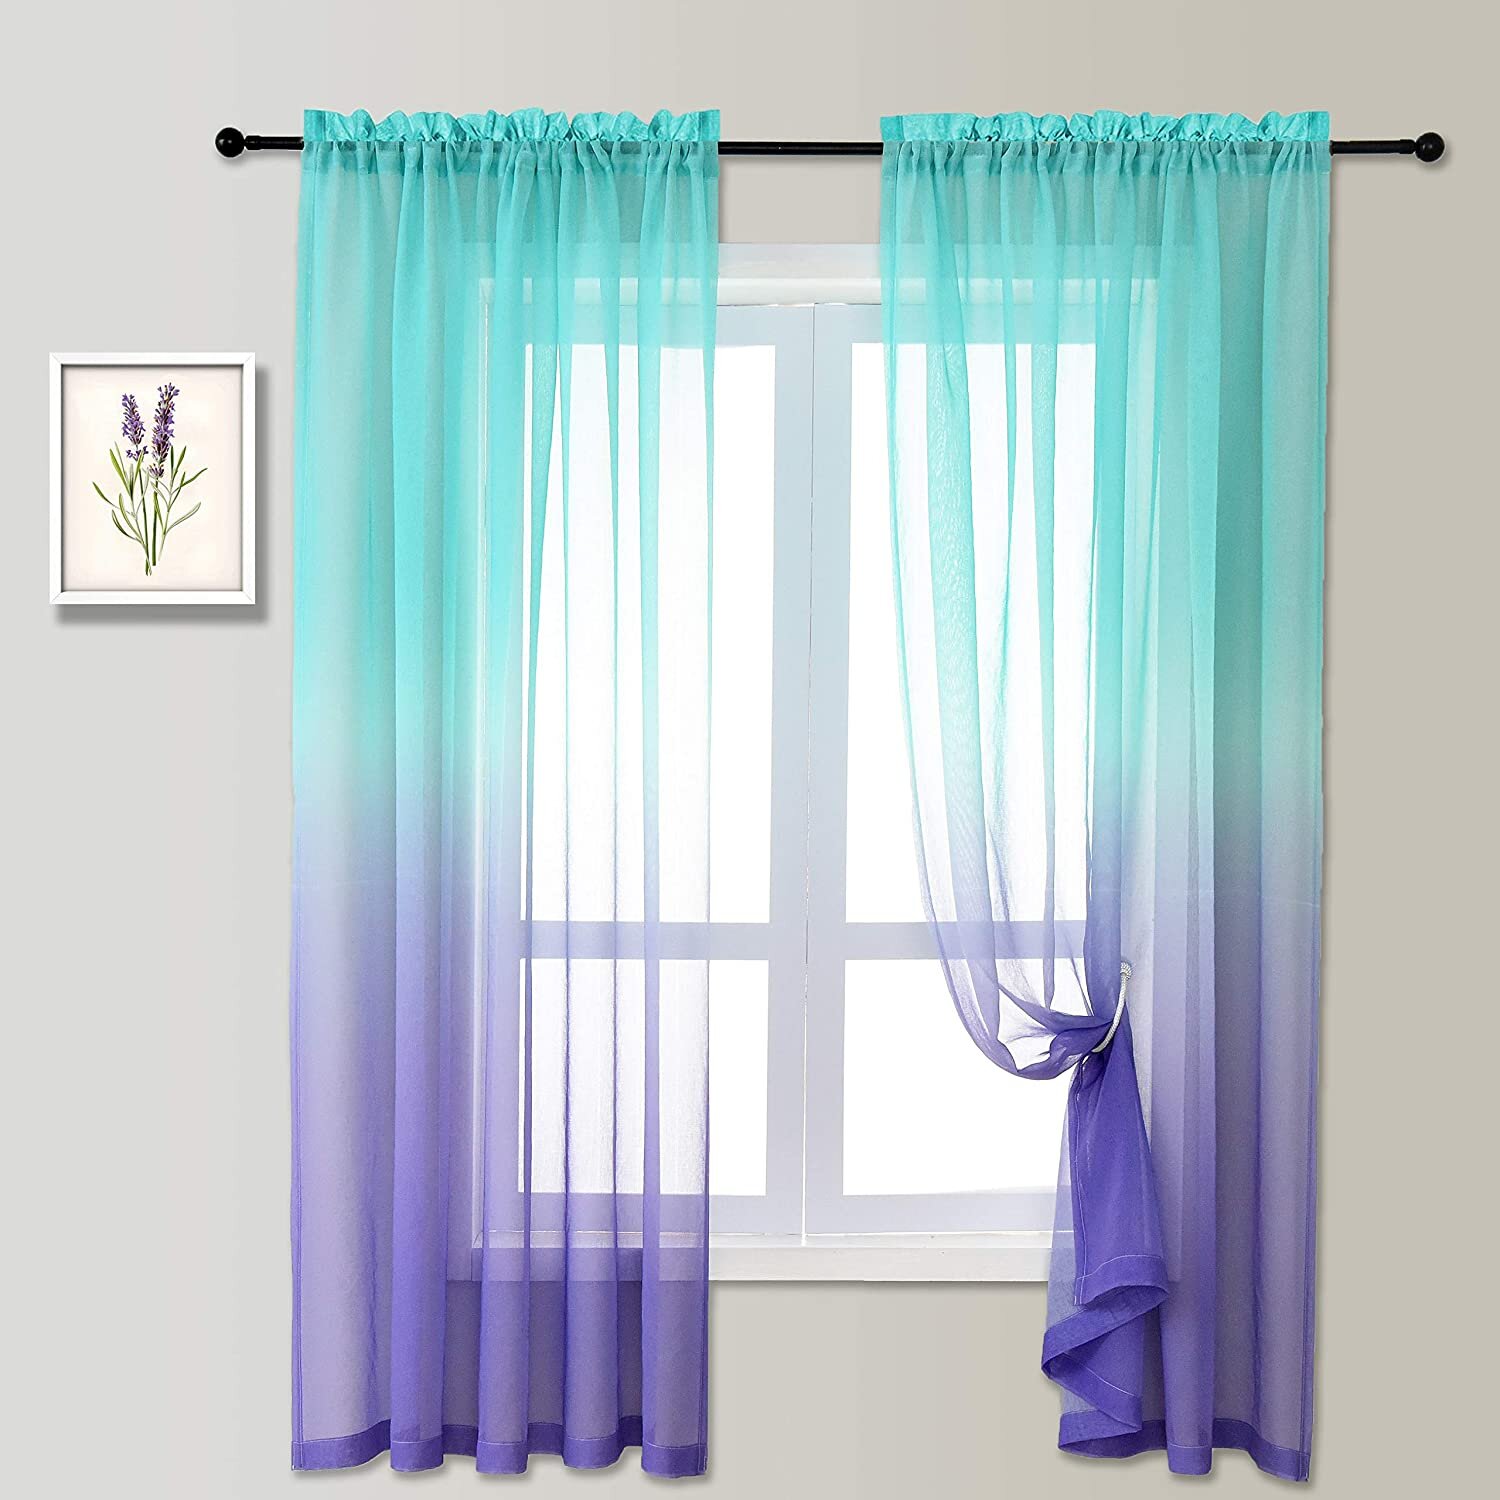 Details about   Two Tone Ombre Curtains Girls Room Kids Bedroom 2 Panels Sky Themed Gradient New 